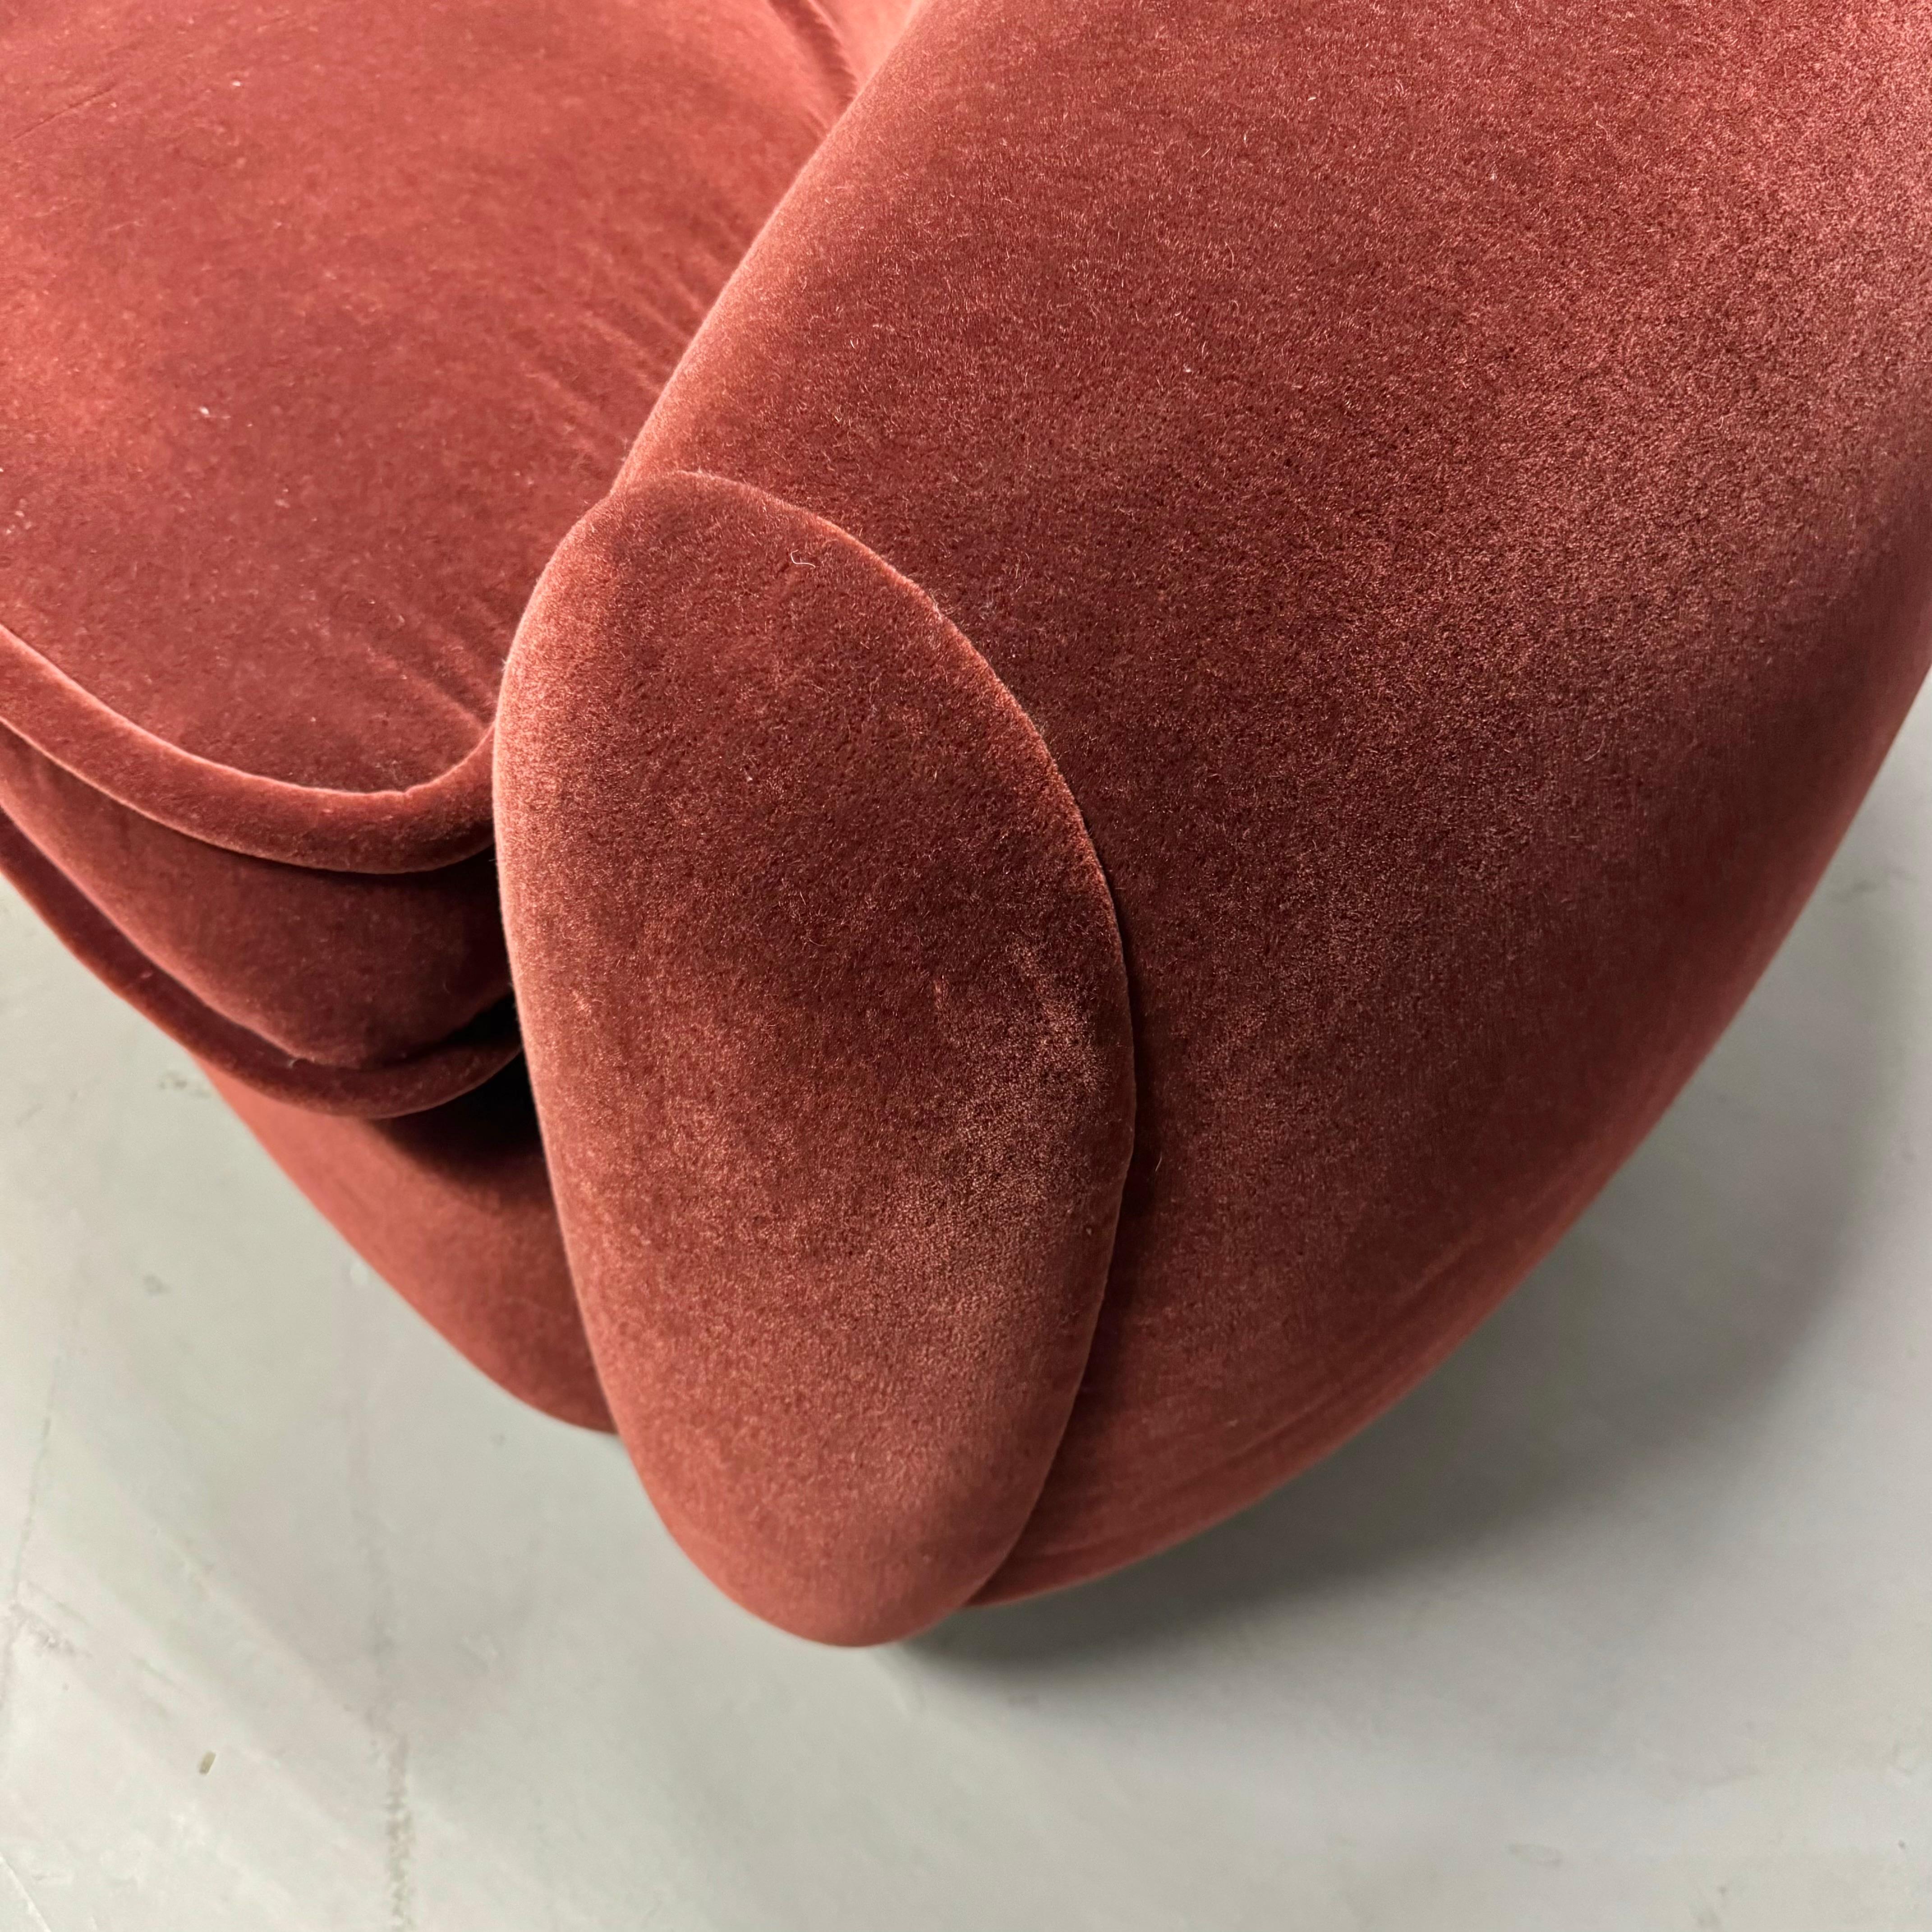 Polar Bear Sofa in the Style of Jean Royère, 2000s USA For Sale 2